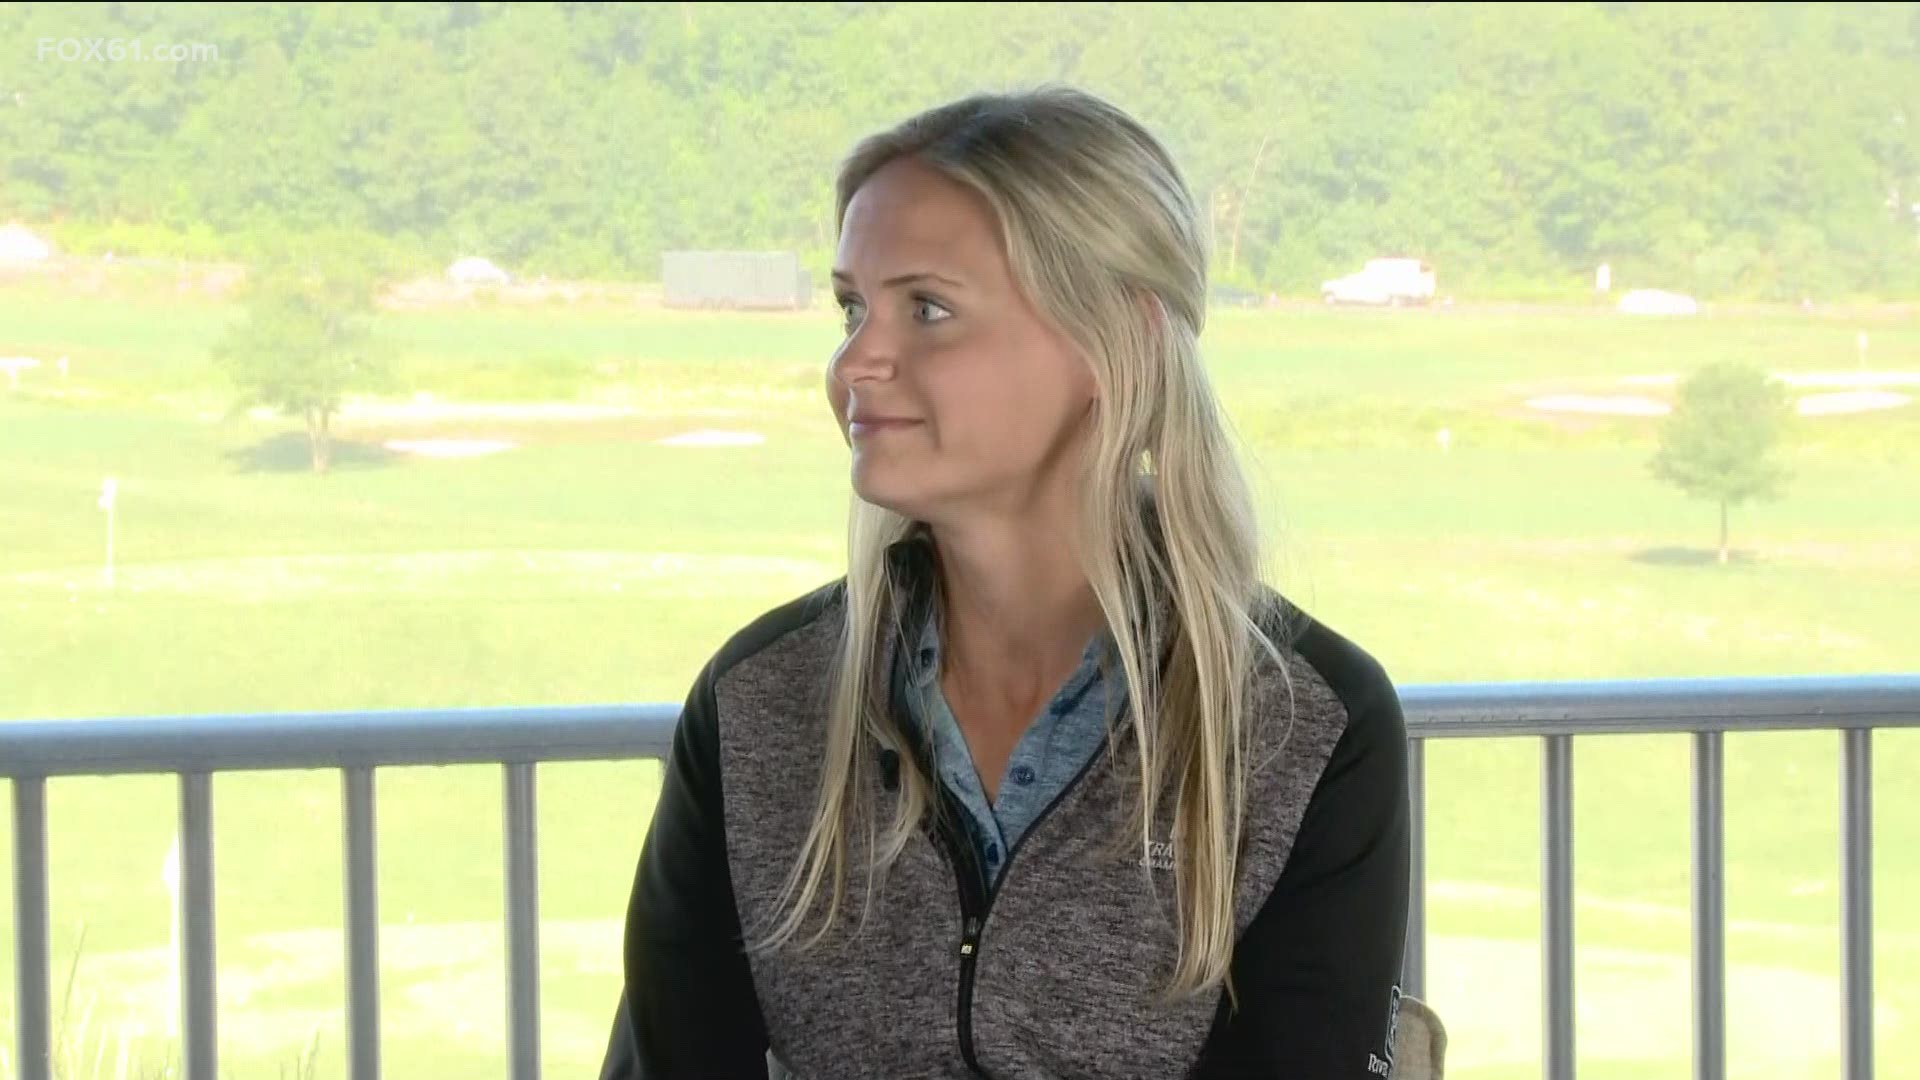 Volunteers help make the Travelers Championship happen. Volunteer & Charity Manager for Travelers Championship Taylor Whiting discusses the impact they have.